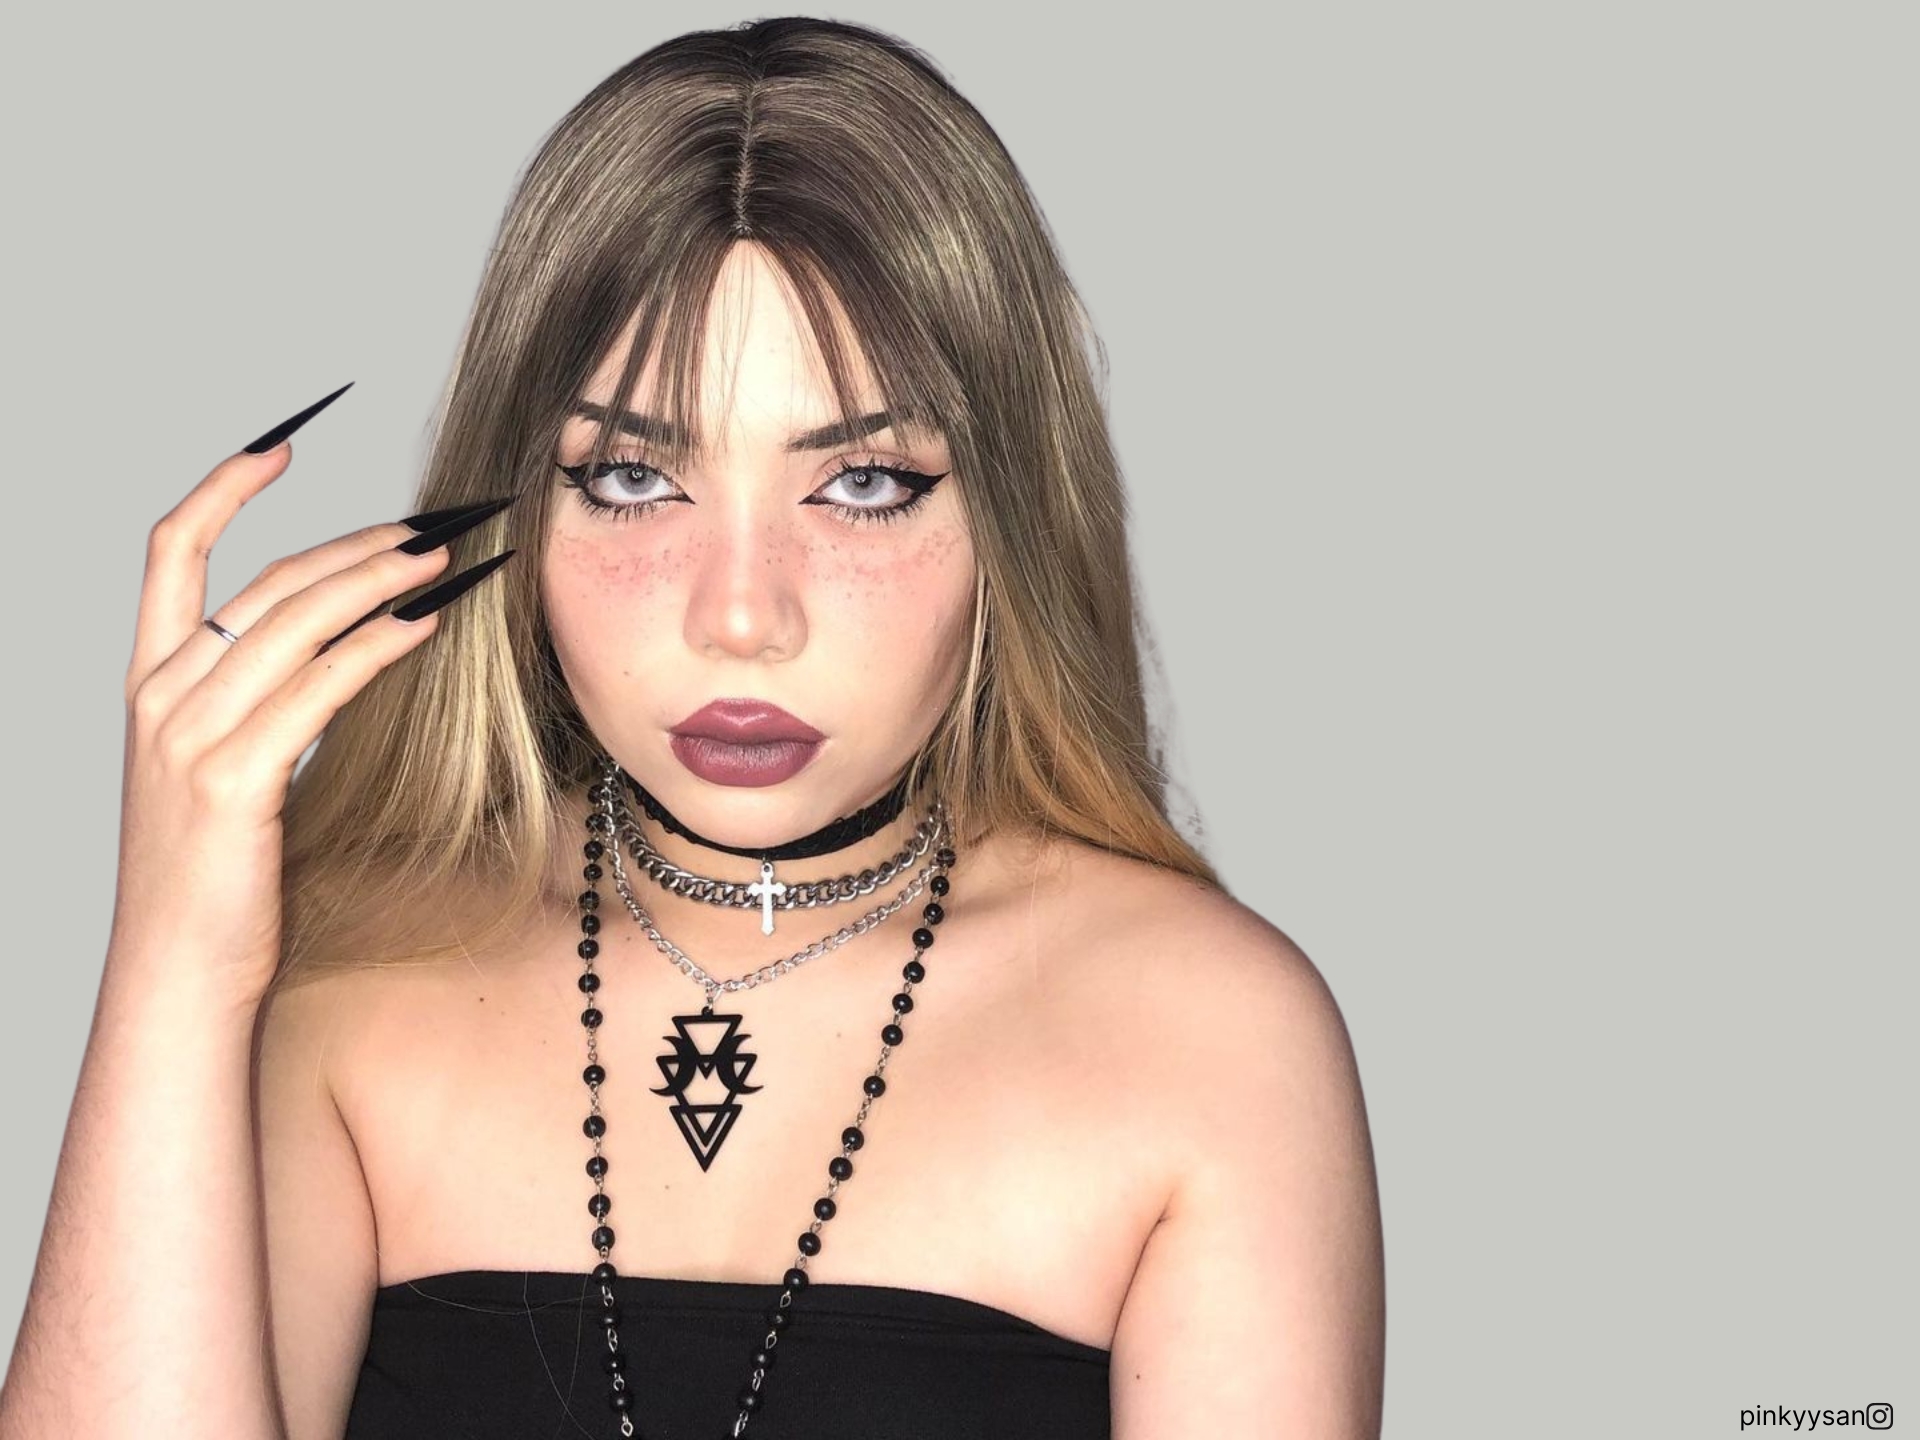 Emo Y2K Makeup Is Having A Comeback And You Can’t Miss It